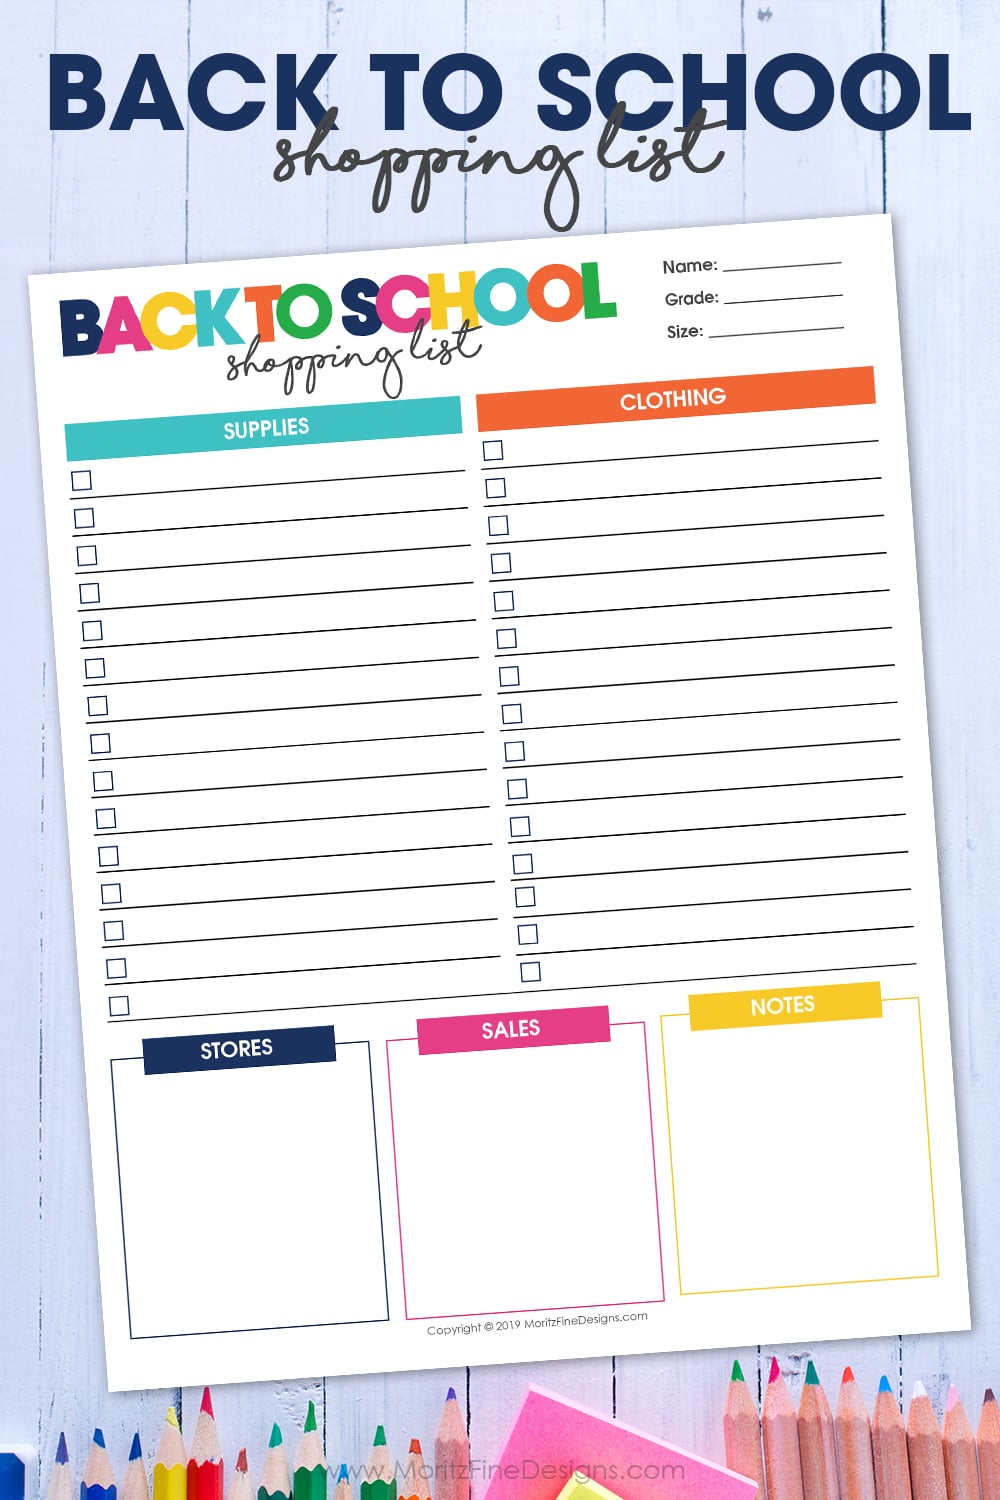 Get the most out of your back to school shopping, use the free printable Back to School Shopping List to creat a complete list of everything your kids need.